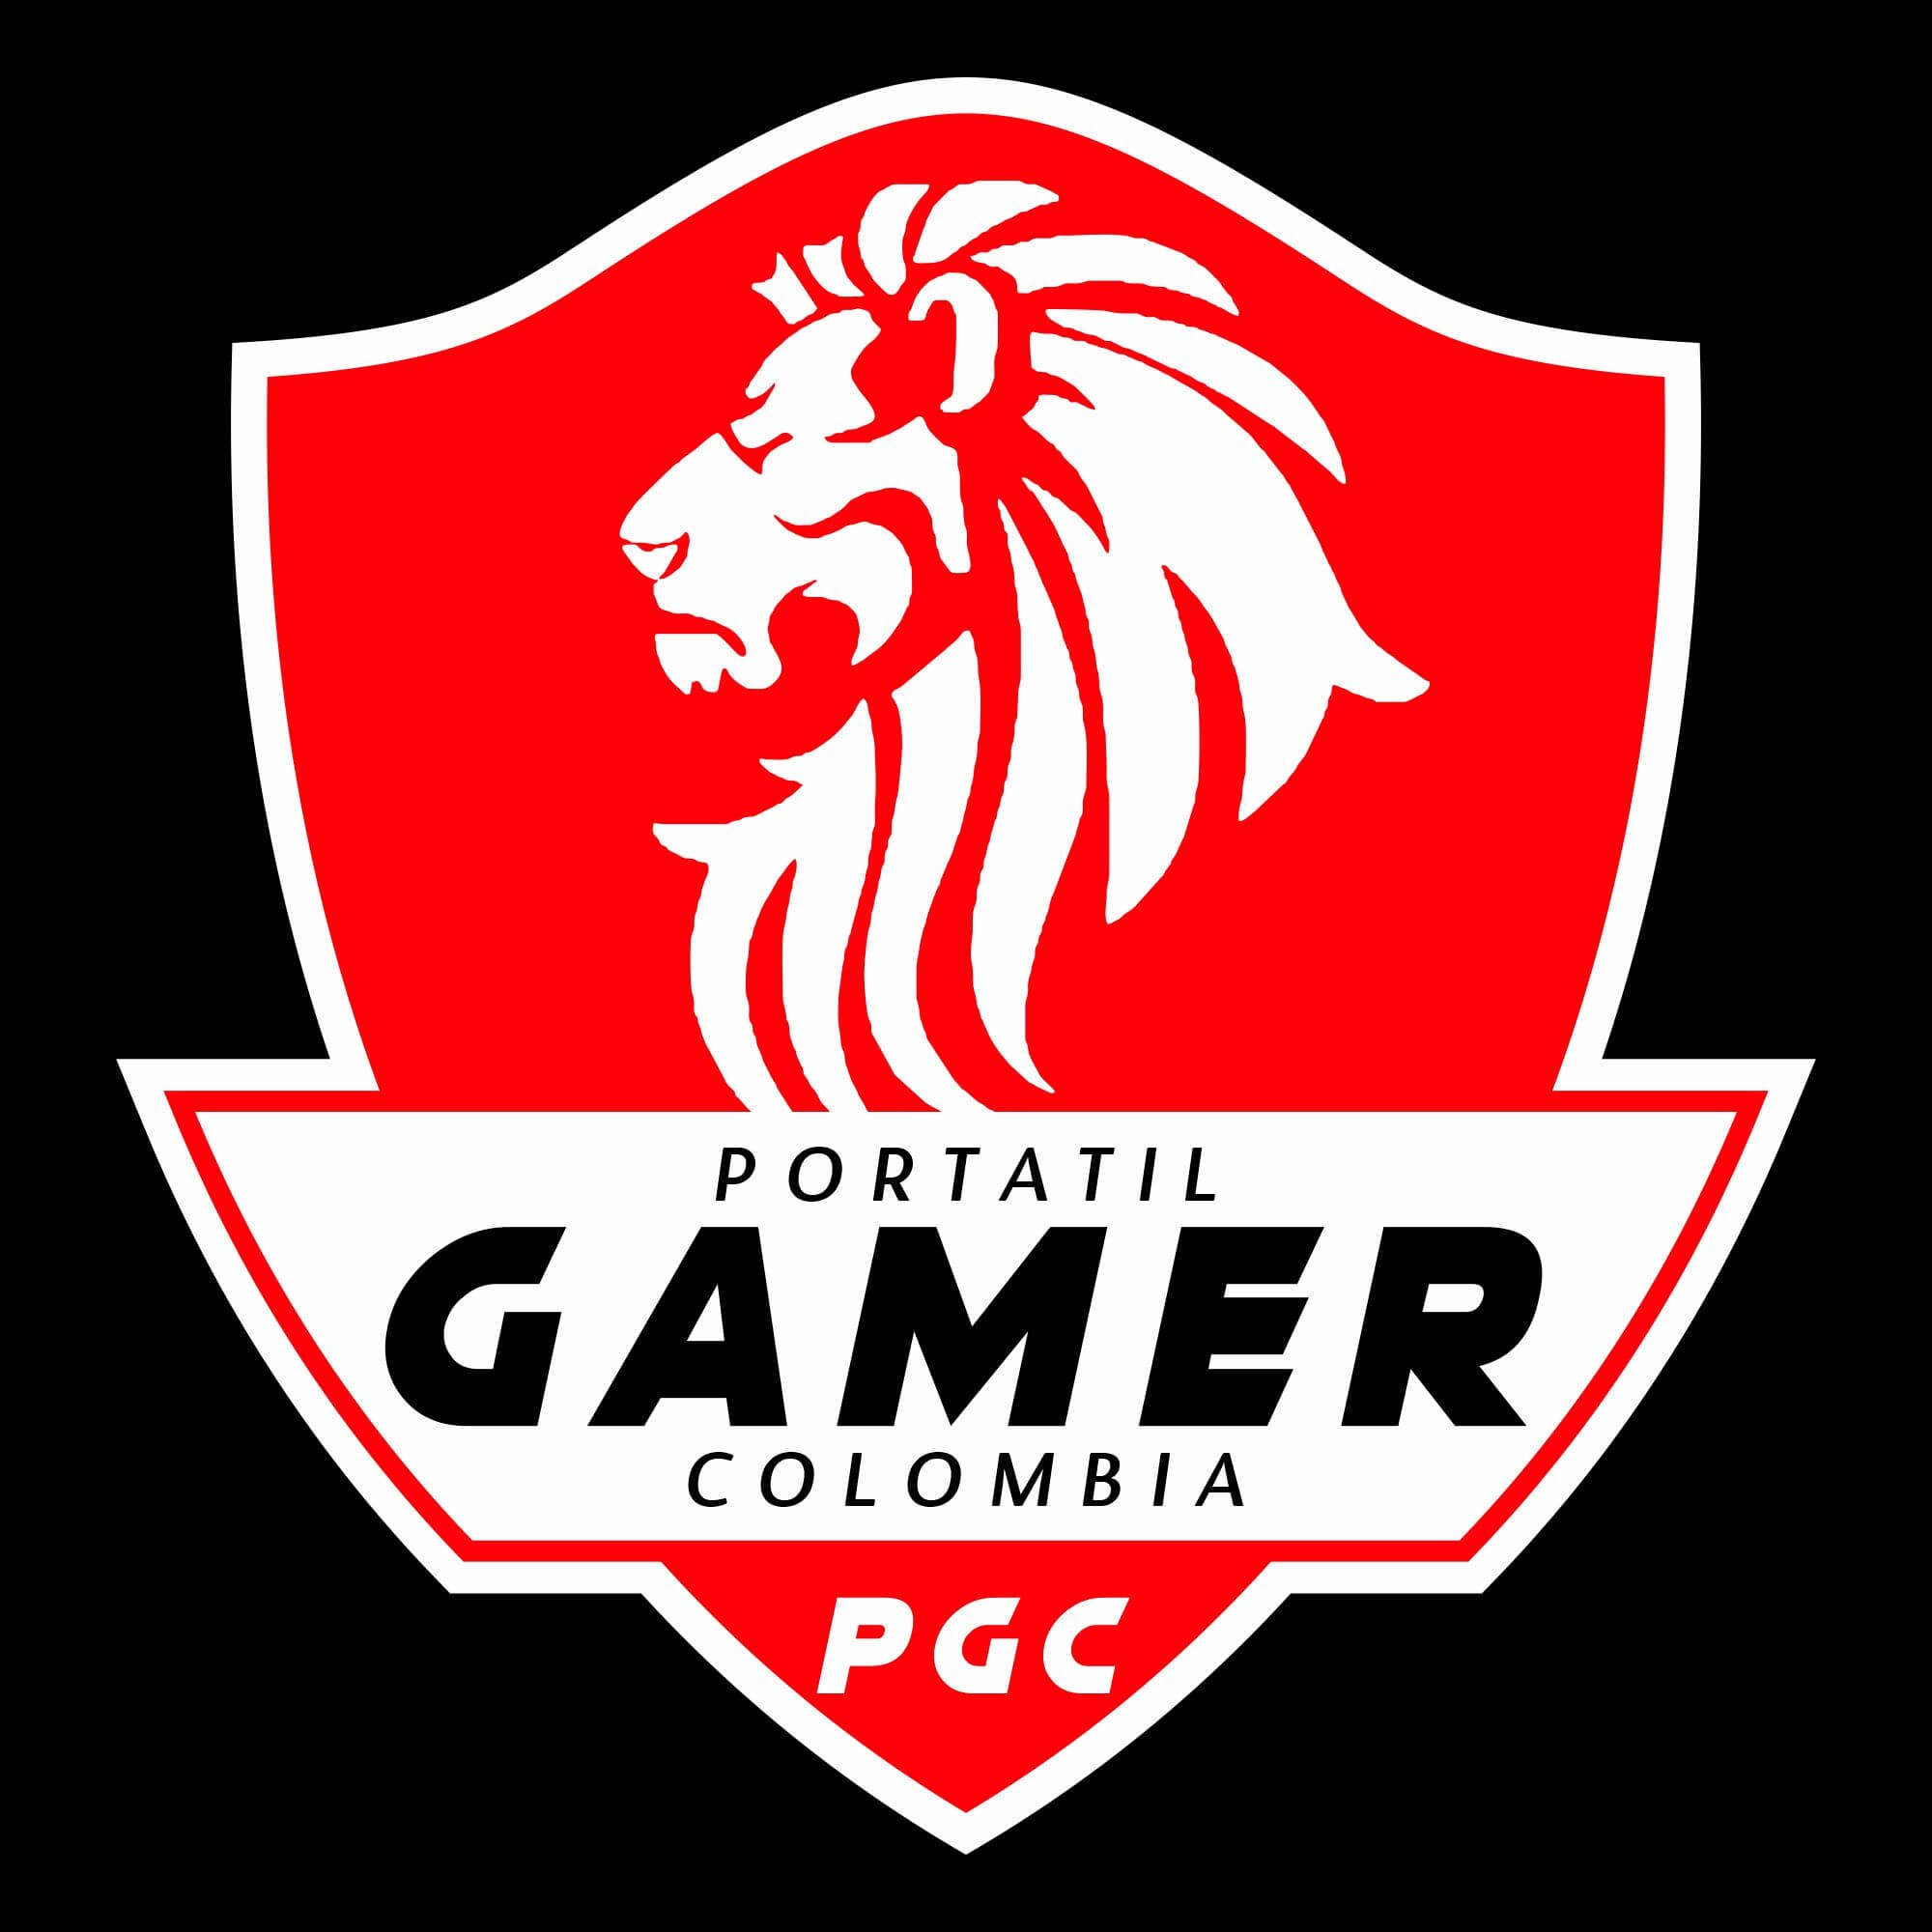 Portatil Gamer Colombia by Professional Wireless